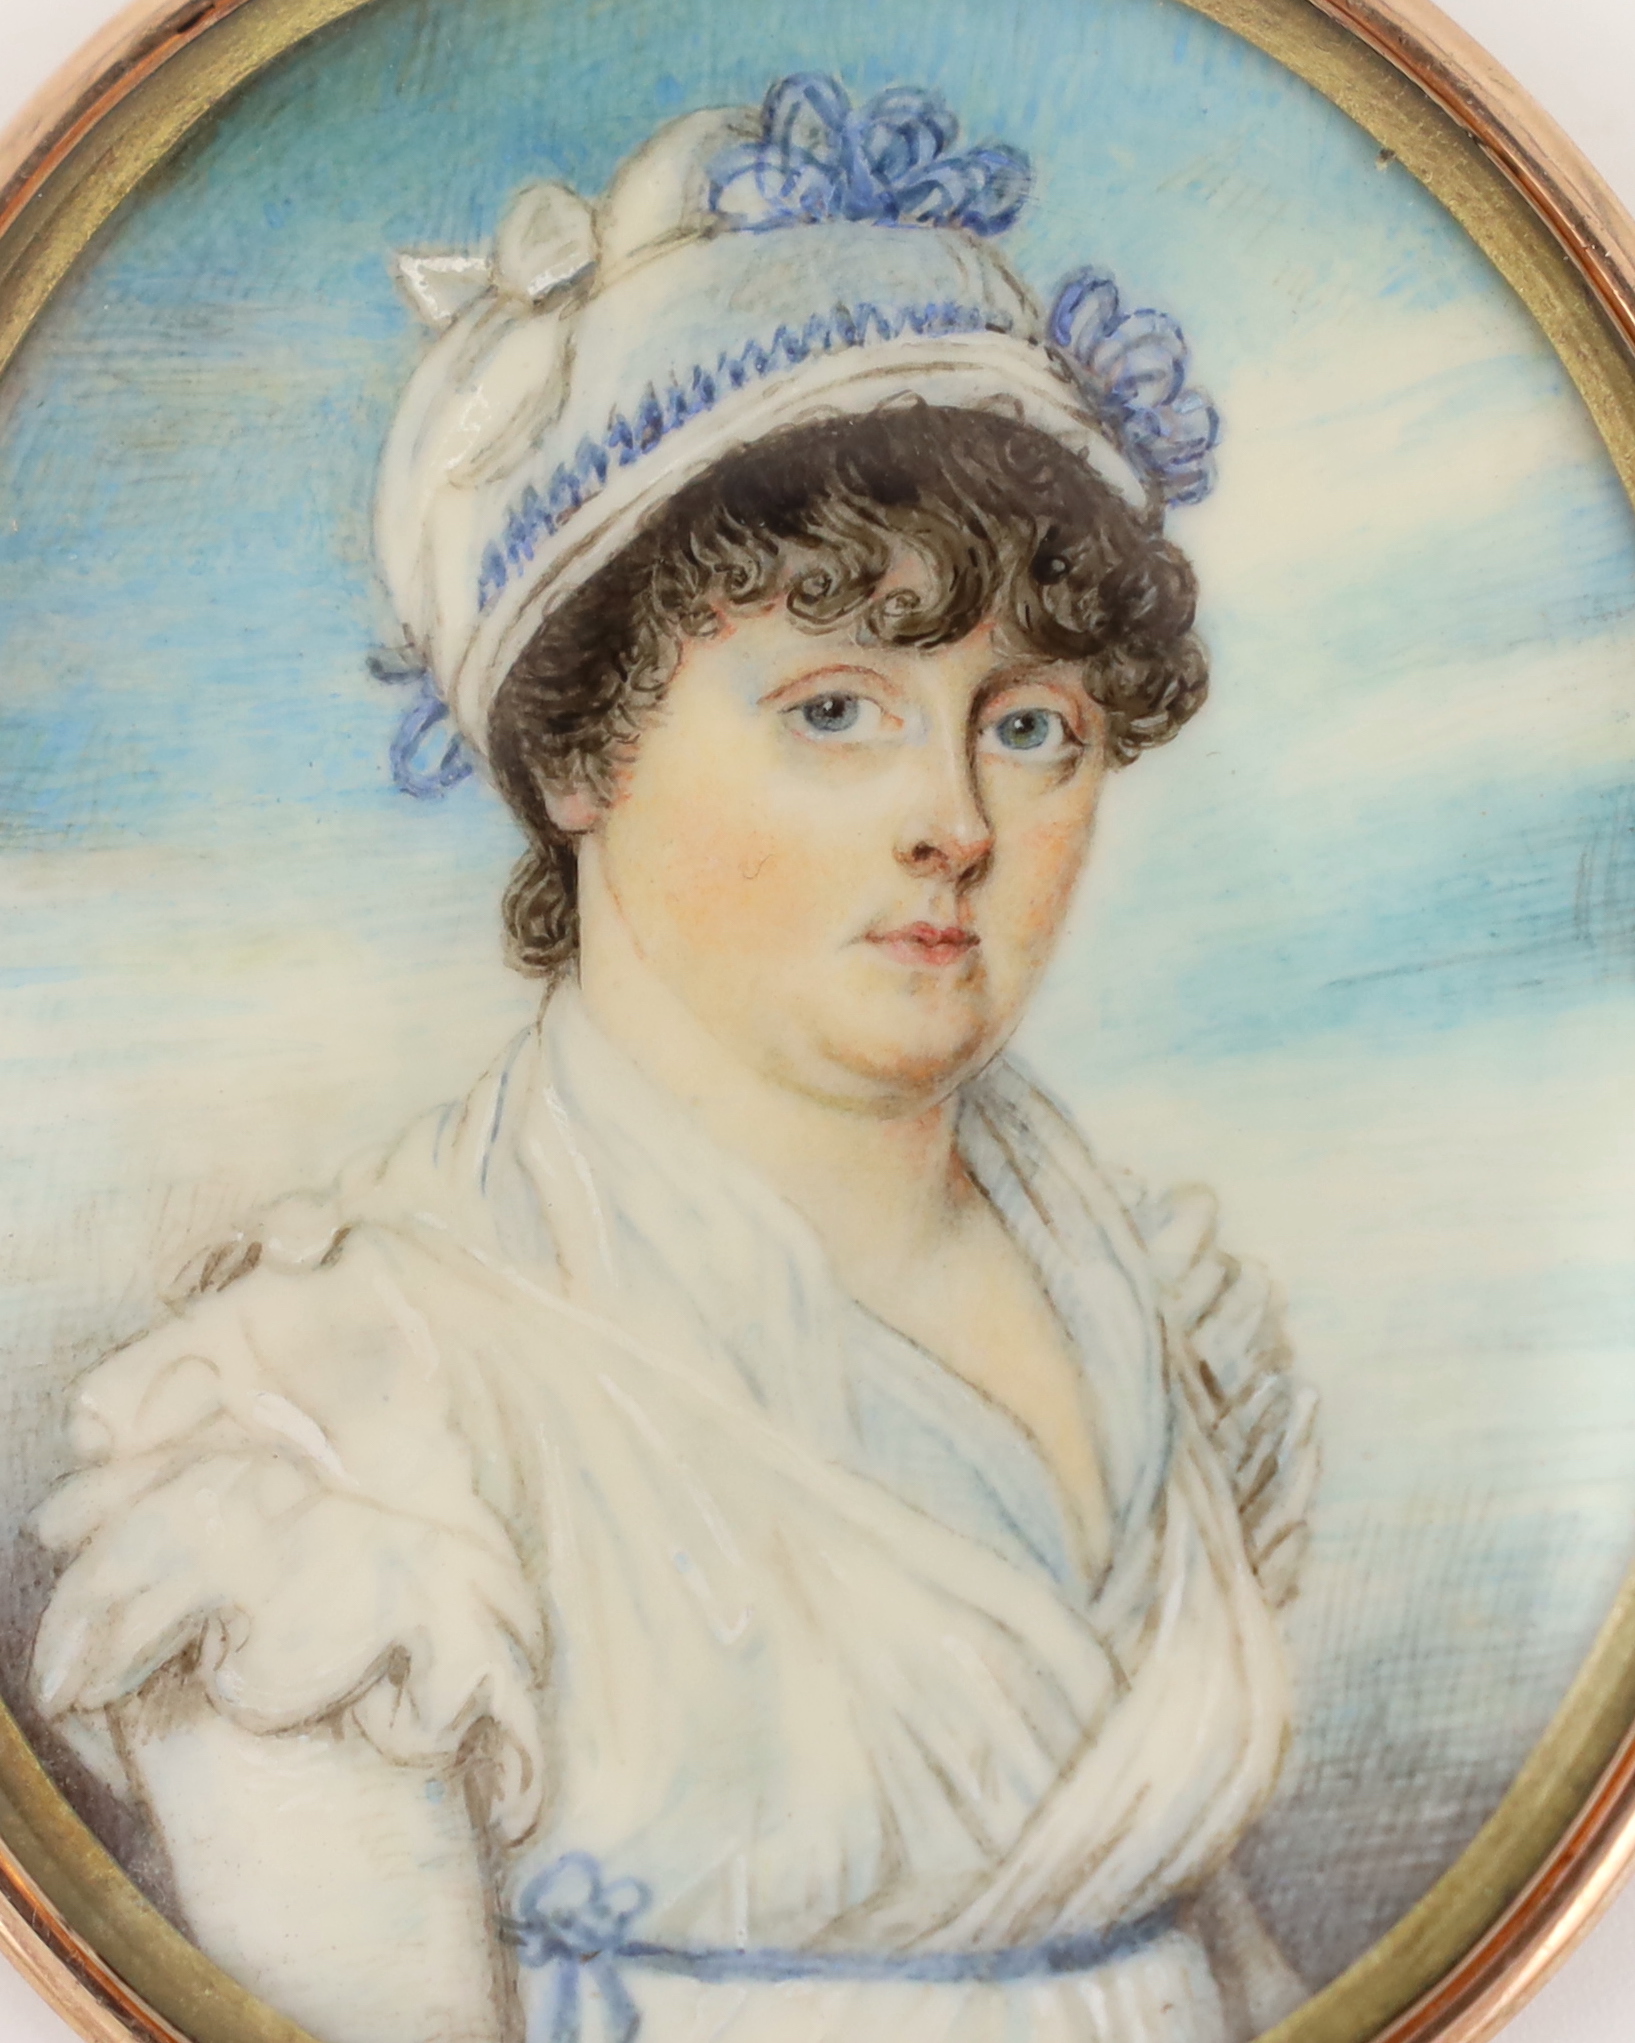 Continental School circa 1830, Portrait miniature of a lady, watercolour on ivory, 6 x 5cm. CITES Submission reference 8MBWZEEH